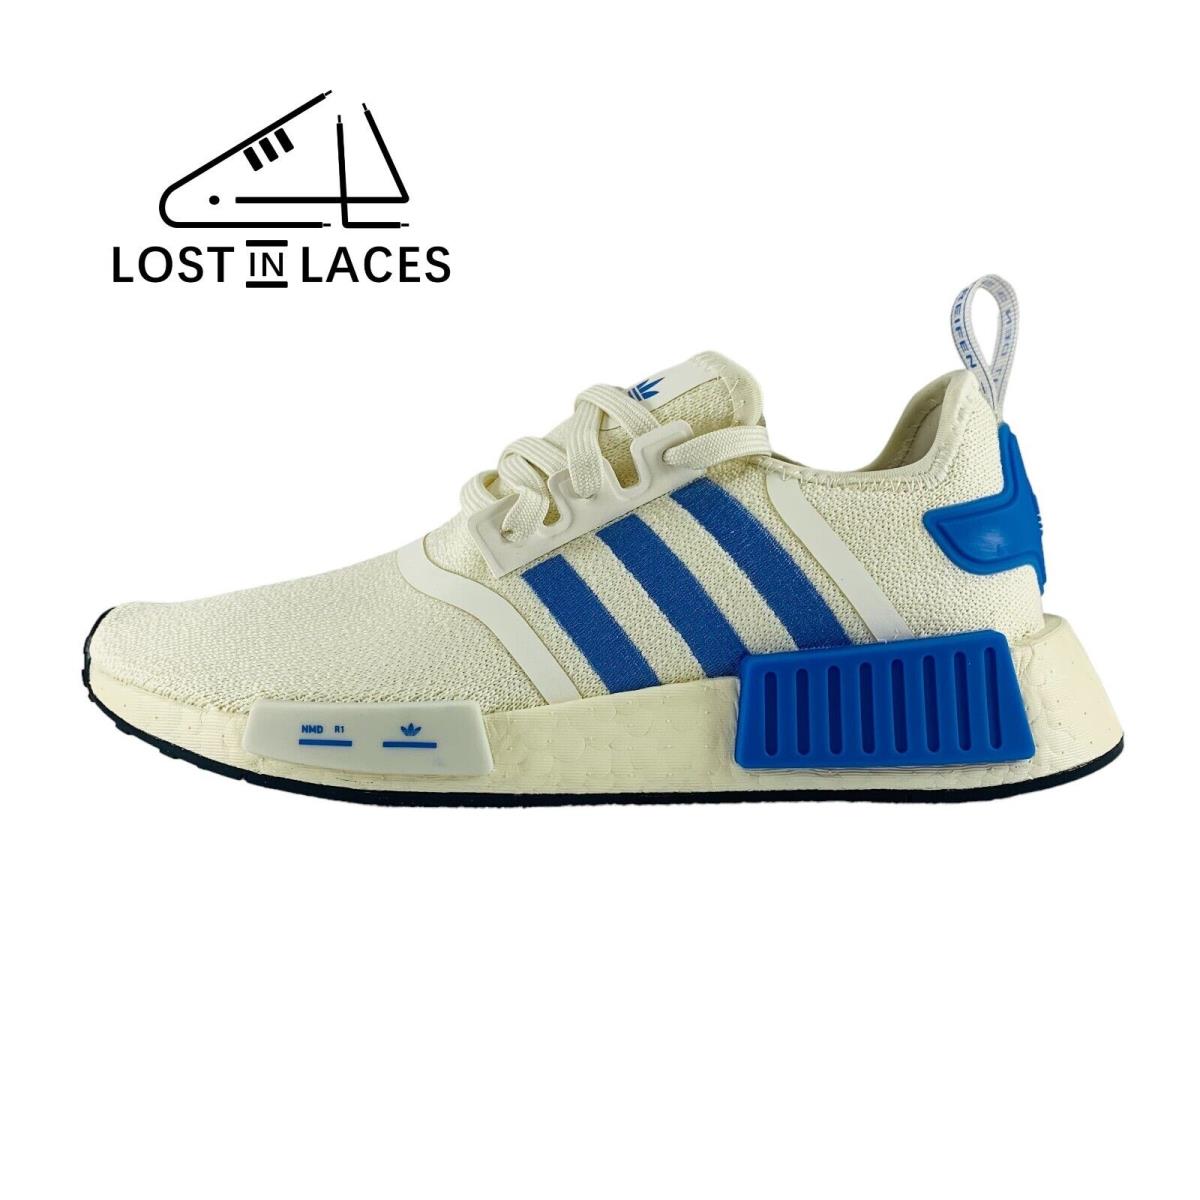 Adidas NMD_R1 White Halo Blue Sneakers Lifestyle Shoes HP2823 Women`s